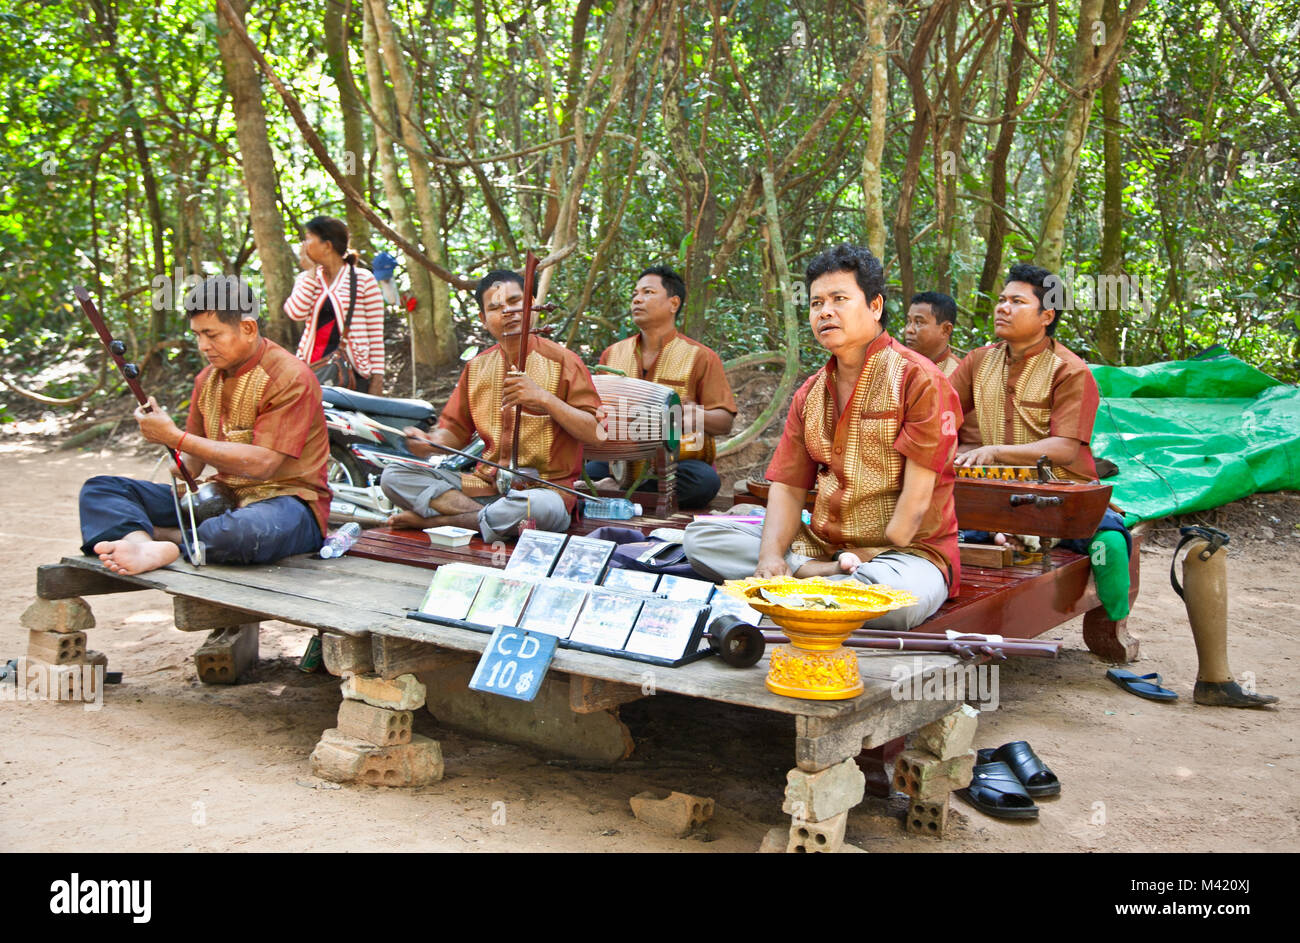 SIEM REAP, CAMBODIA - NOV 20, 2013: Unidentified musicians, victims of anti-personal mines, perform in Angkor Wat and collect money for their associat Stock Photo